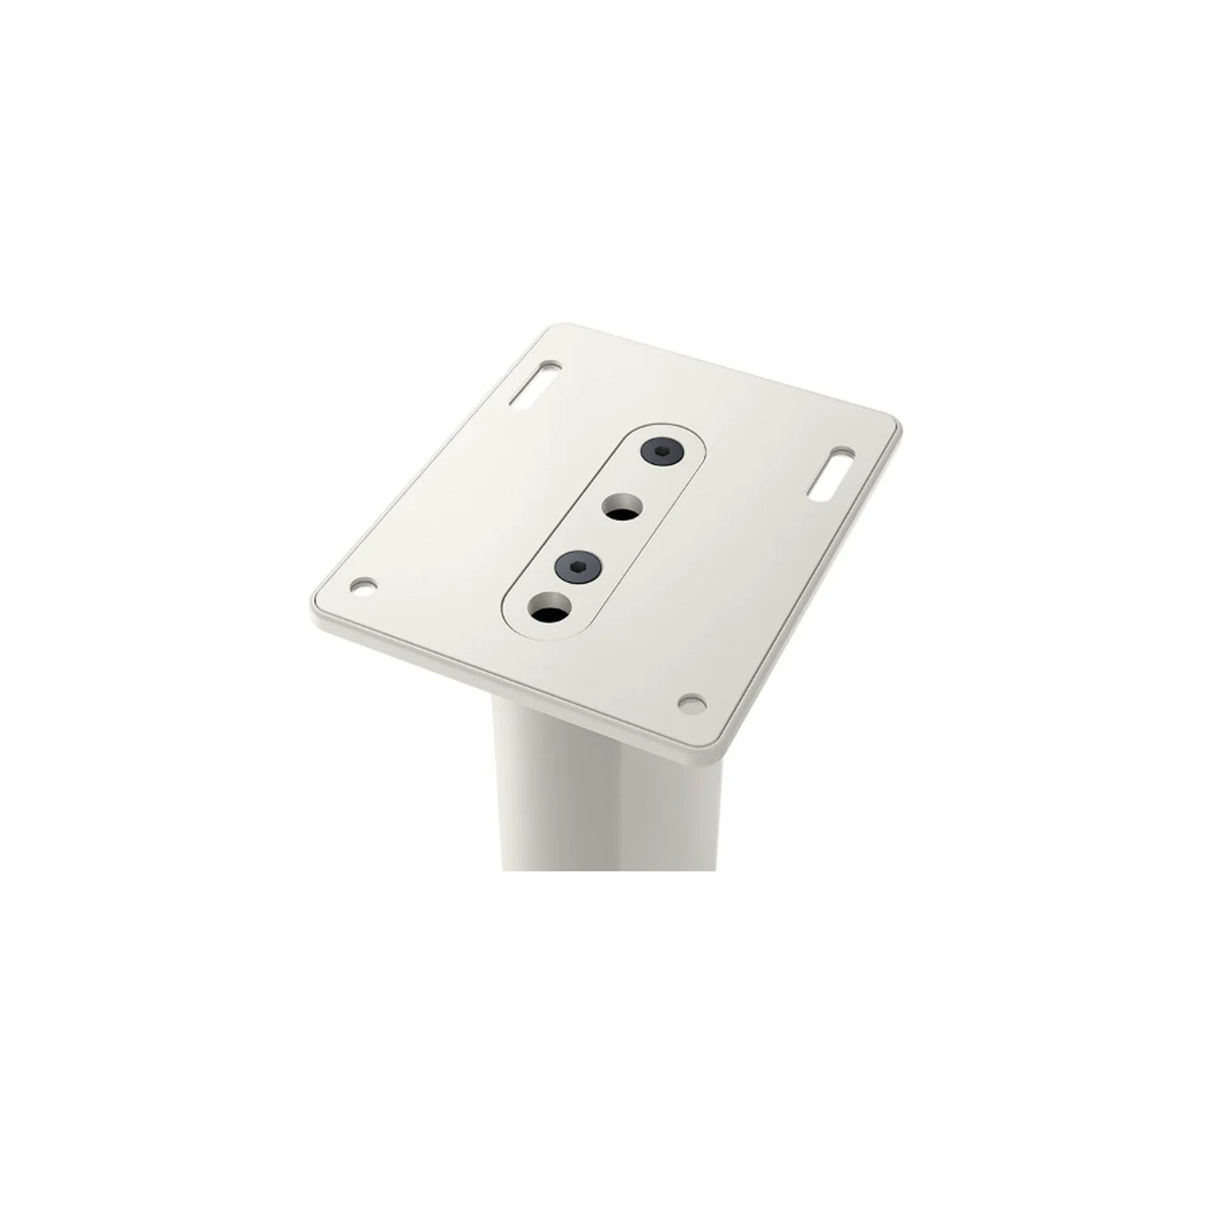 KEF S2 Floor Stands - For Kef LS50 Series (Mineral White)